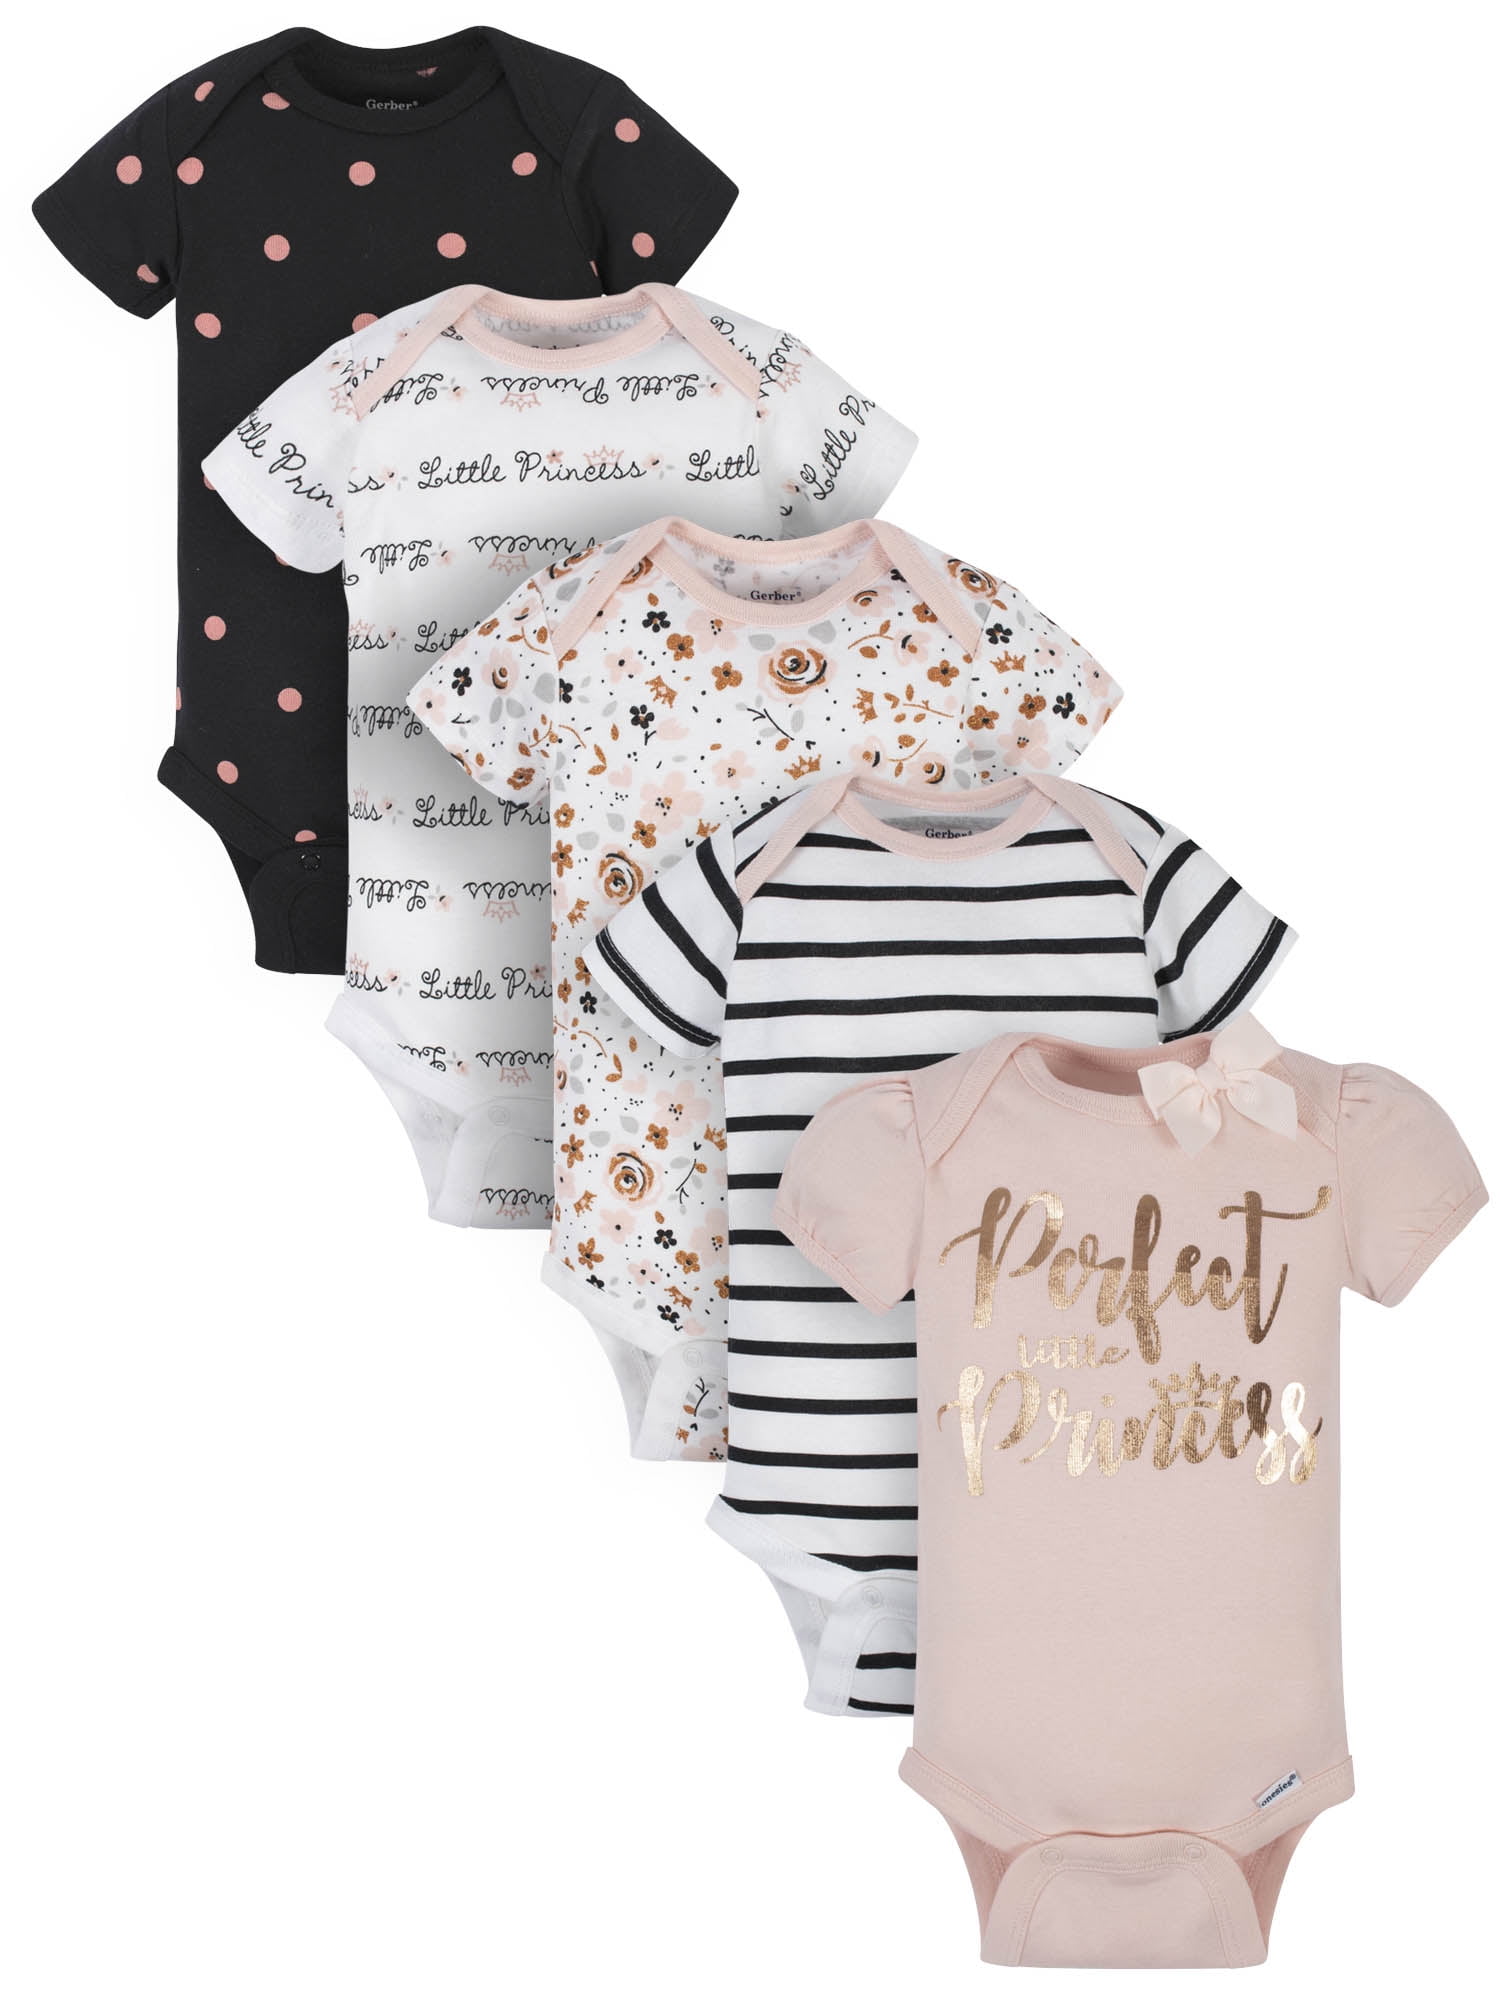 Sizes Preemie to 18 months long & short sleeved available My First Valentine's Day Onesie® Baby Gerber Onesie® with red and black text